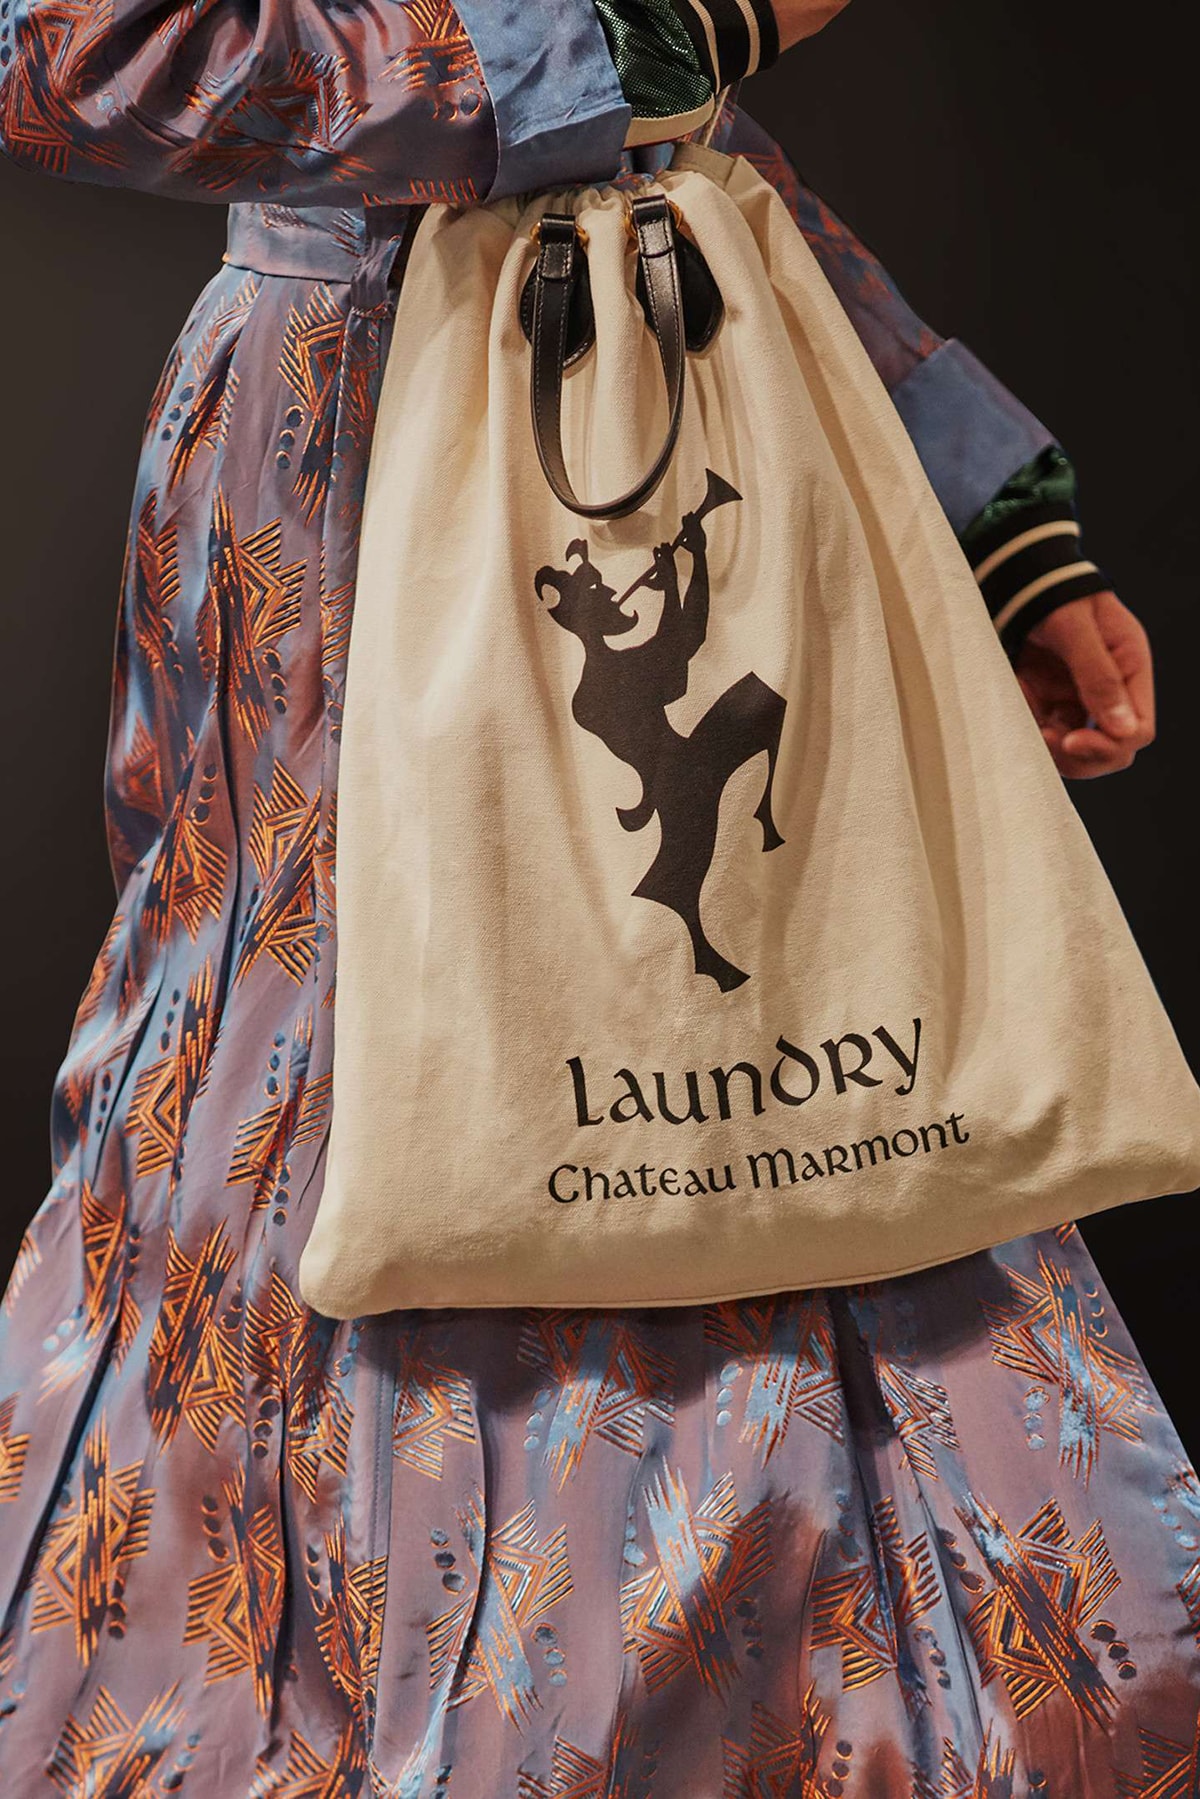 Gucci Cruise 2019 Runway Details Laundry Bag Canvas